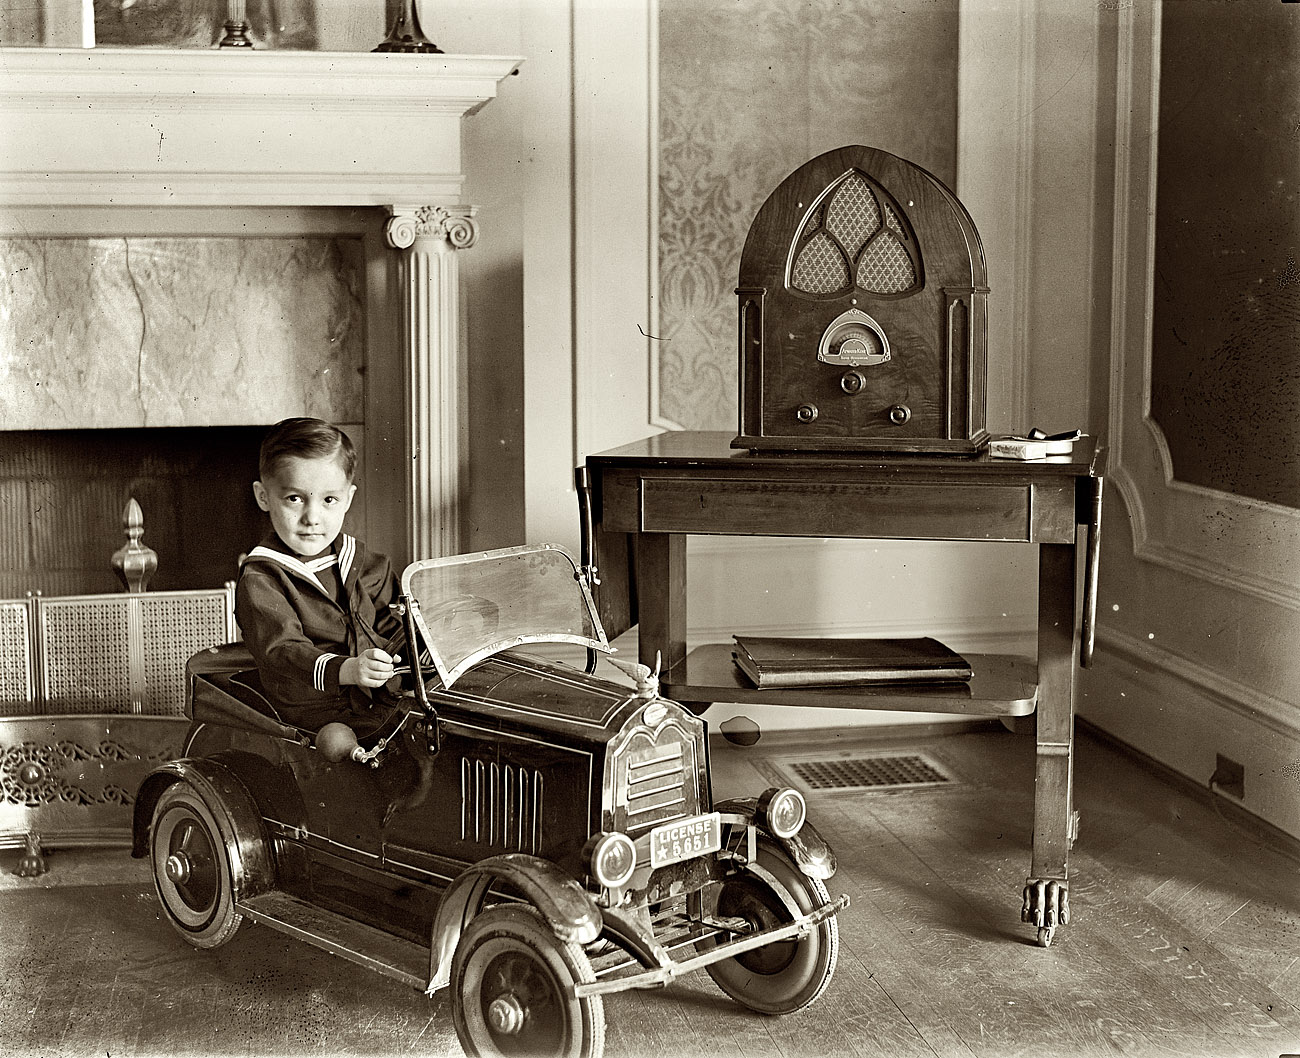 Washington, D.C., circa 1931. "Child seated in toy automobile." View full size. National Photo Company Collection glass negative. The radio: Atwater-Kent 84Q.